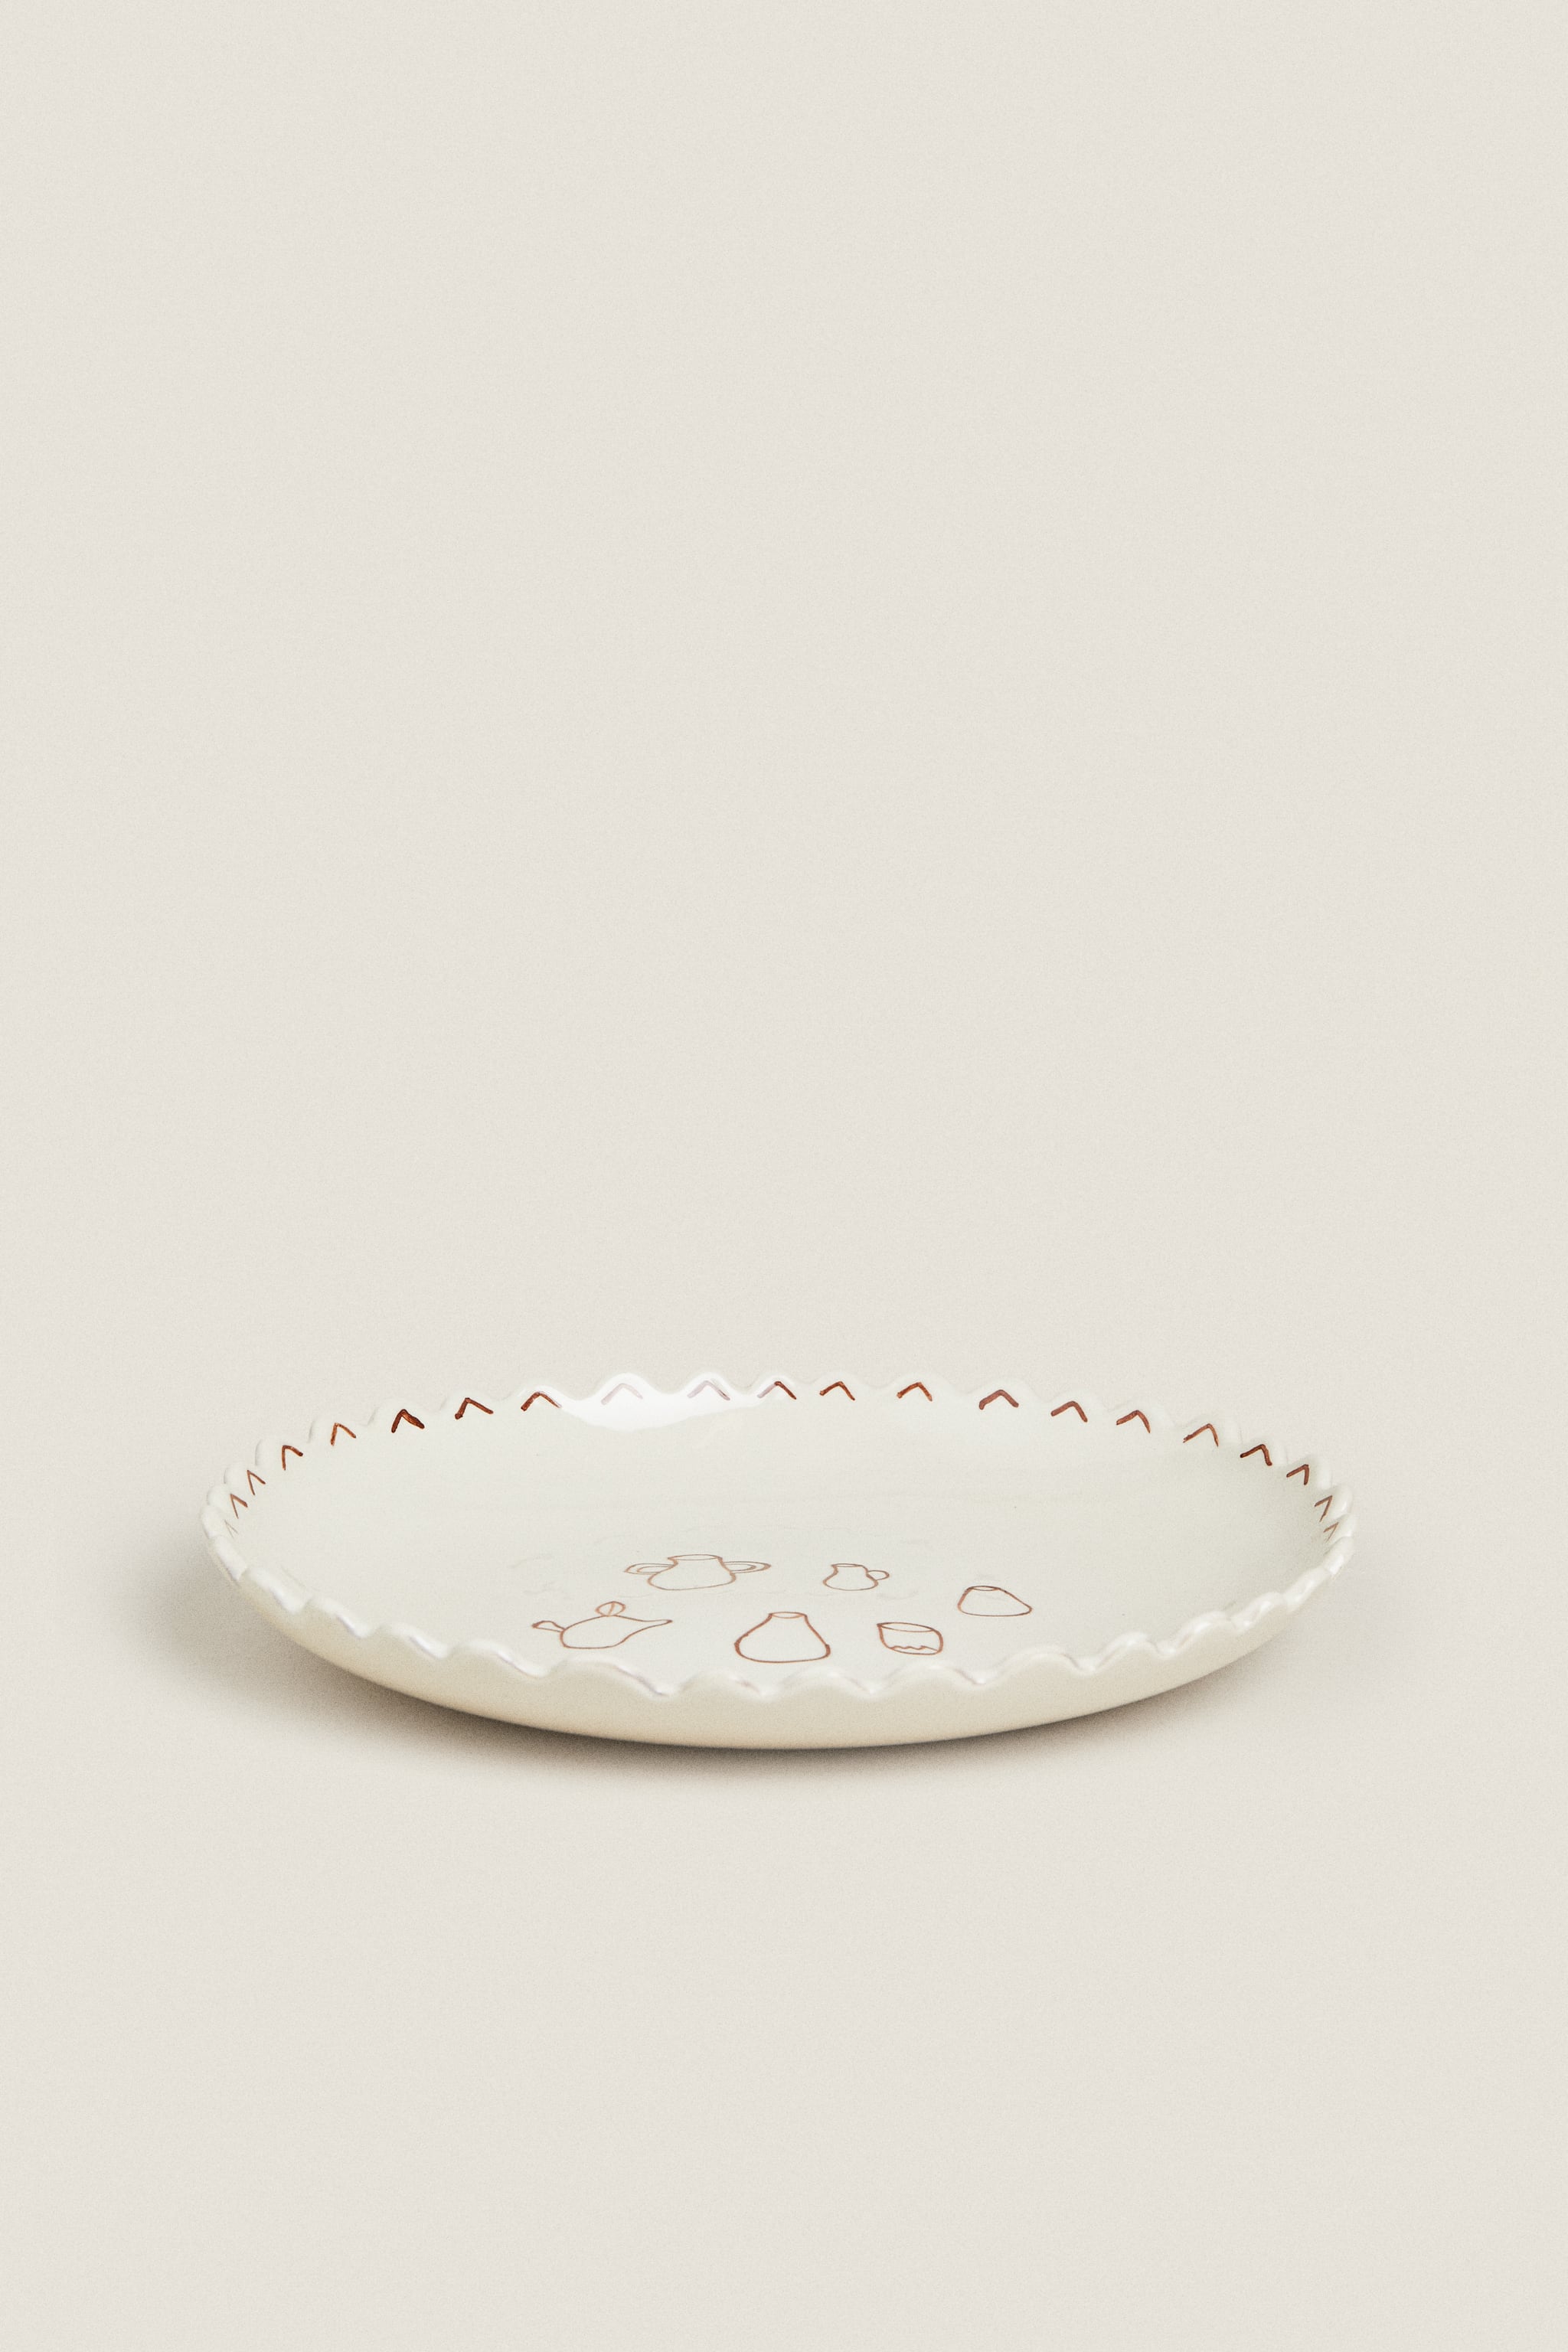 STONEWARE SERVING DISH WITH MOTIFS